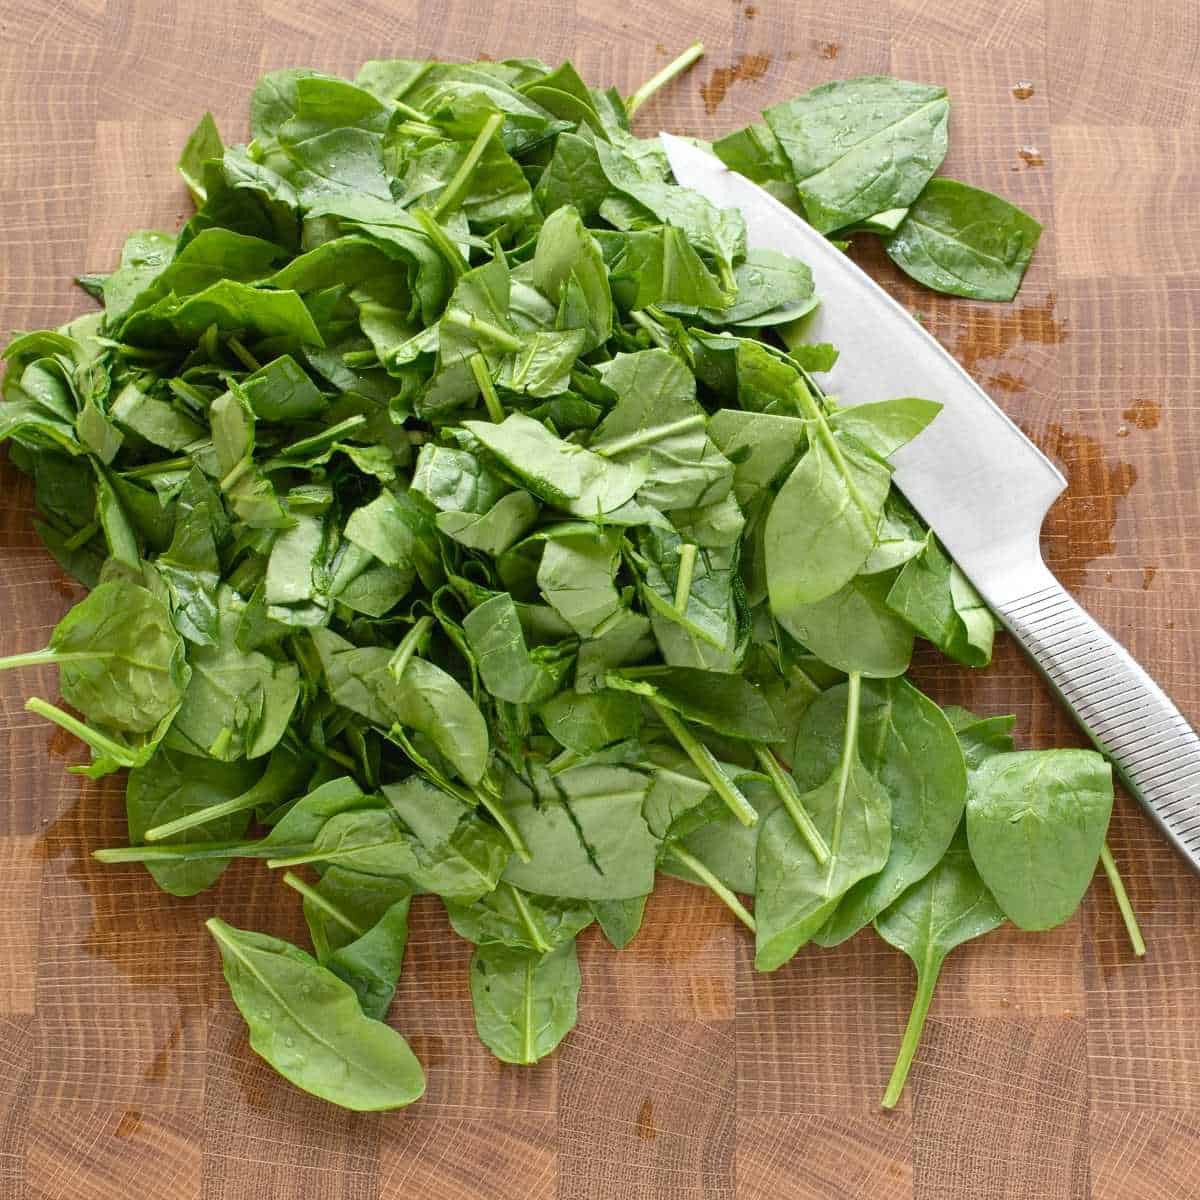 Chopping green baby spinach leaves with a knife, on wooden kitchen board.